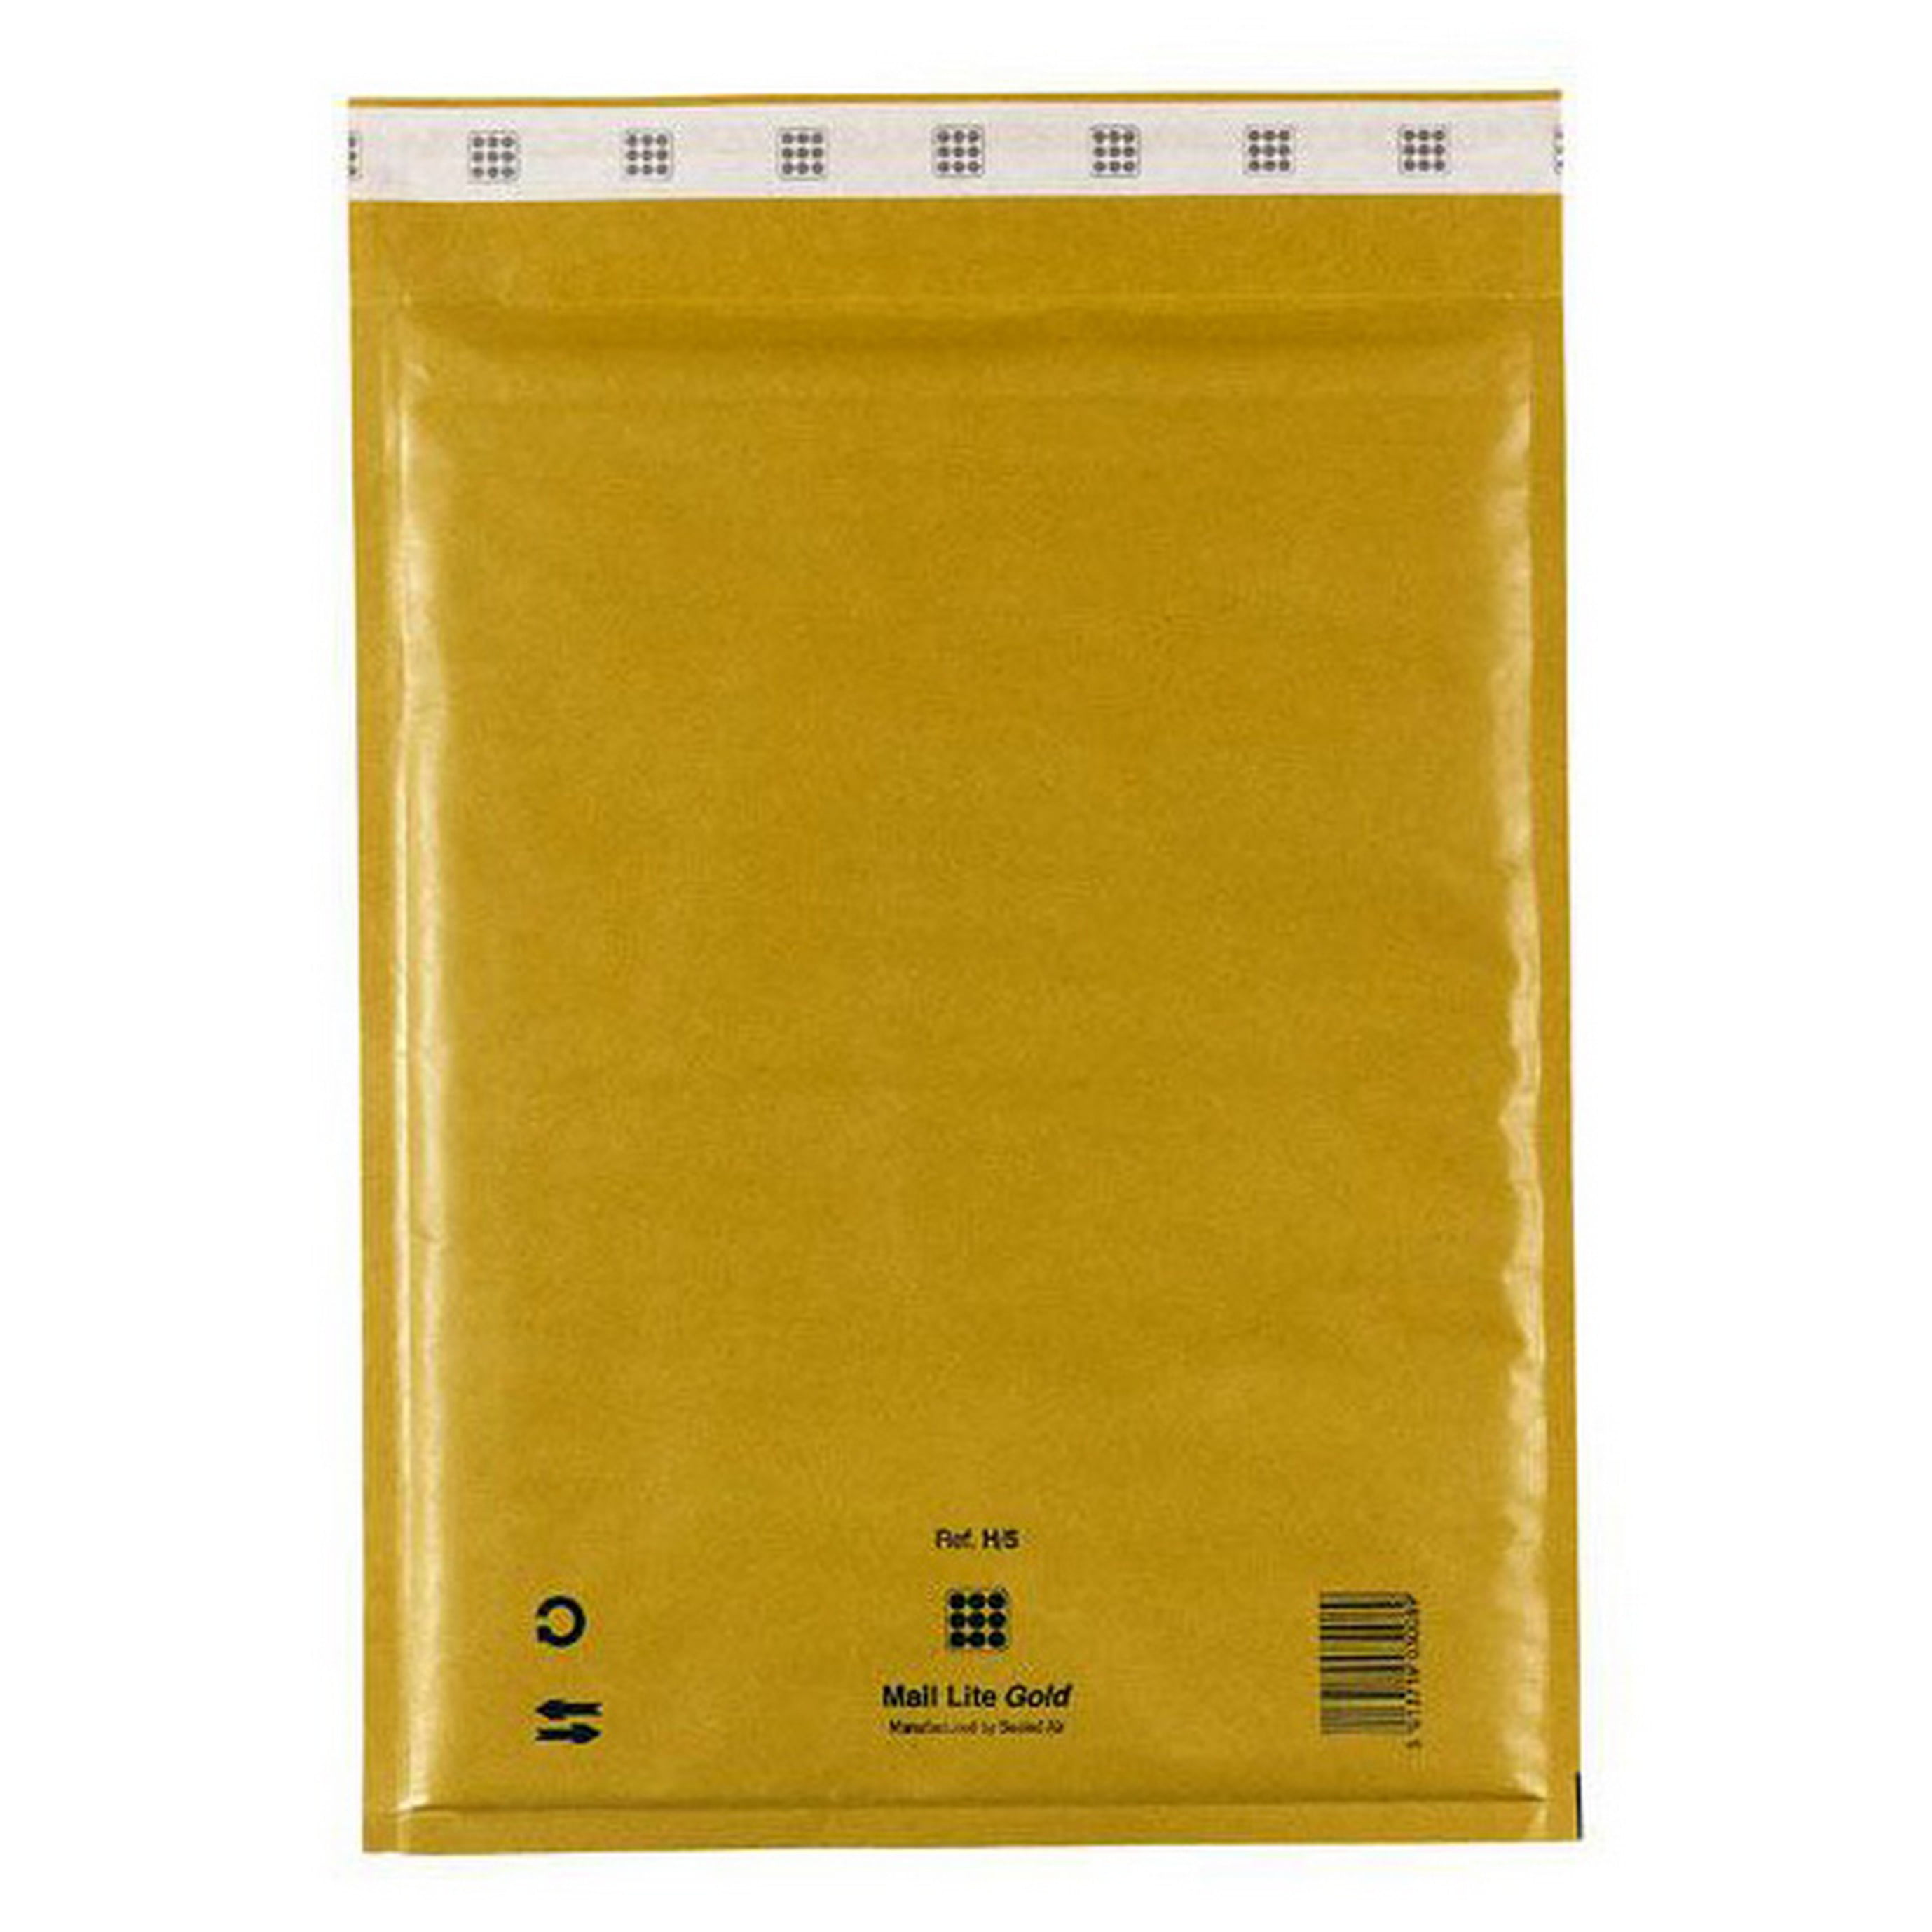 Original Arofol Brown Gold Padded Bubble Envelopes Postal Mailers Bags All Sizes 